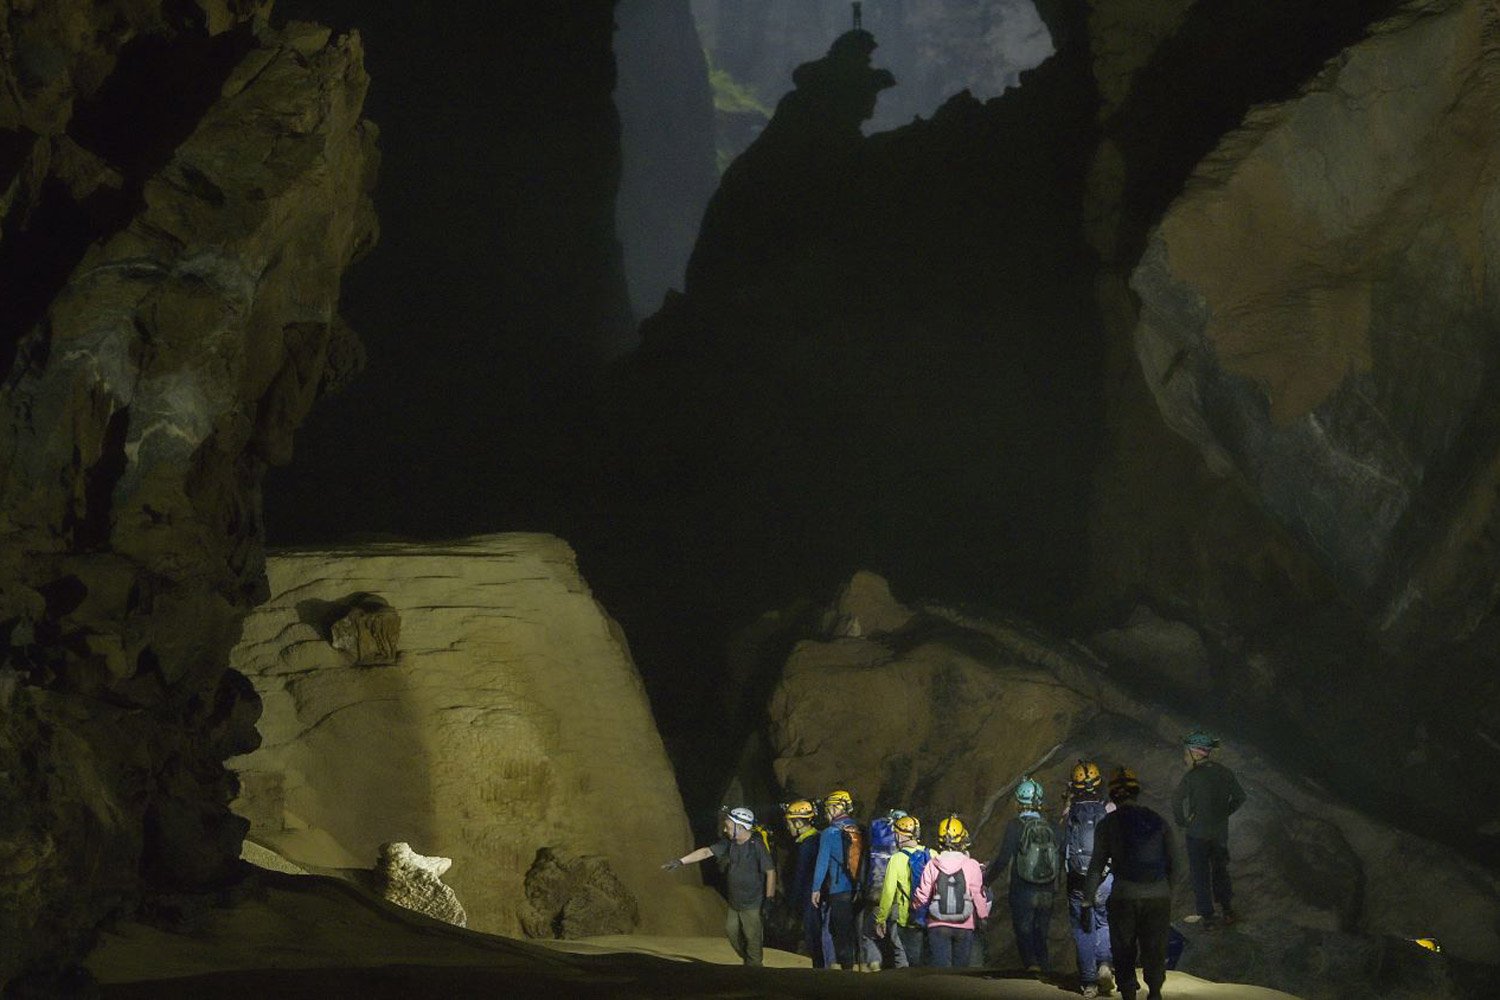 Visitors are exploring near the Hand of Dog stalagmite in Son Doong Cave.